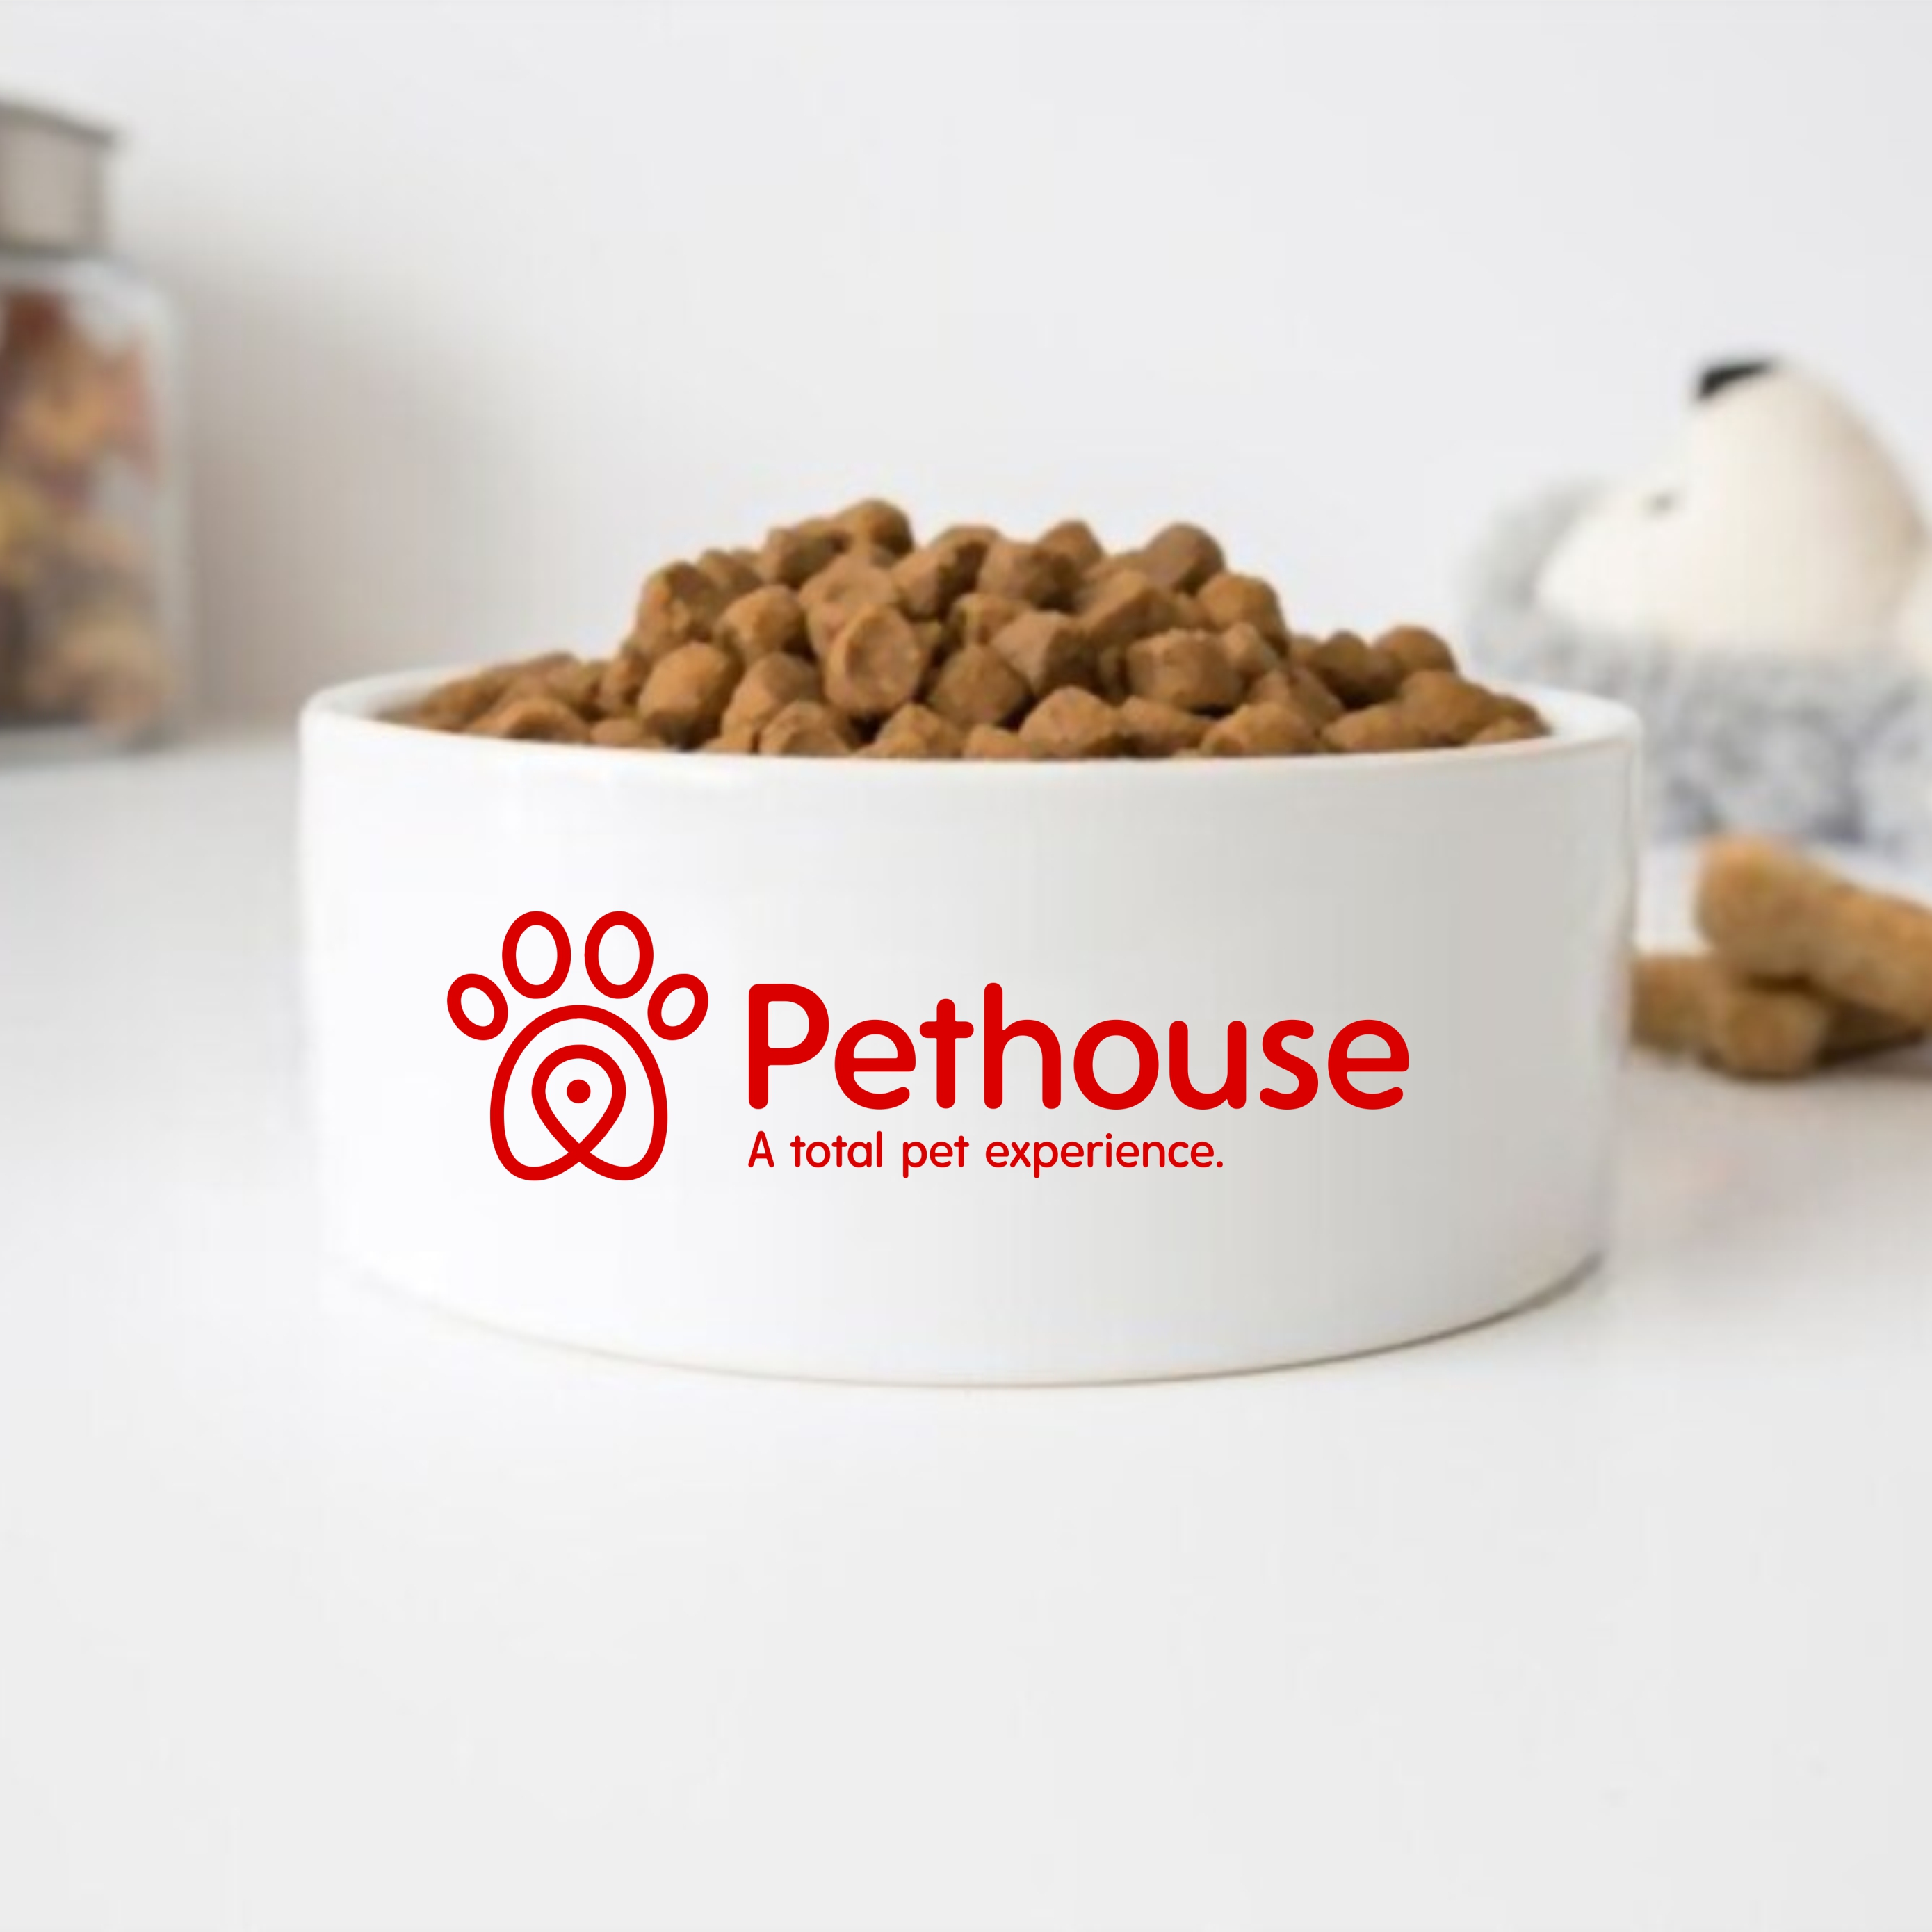 Concept by Blackcurrant for Pethouse, a Complete Solution under One Roof for All Pet Needs